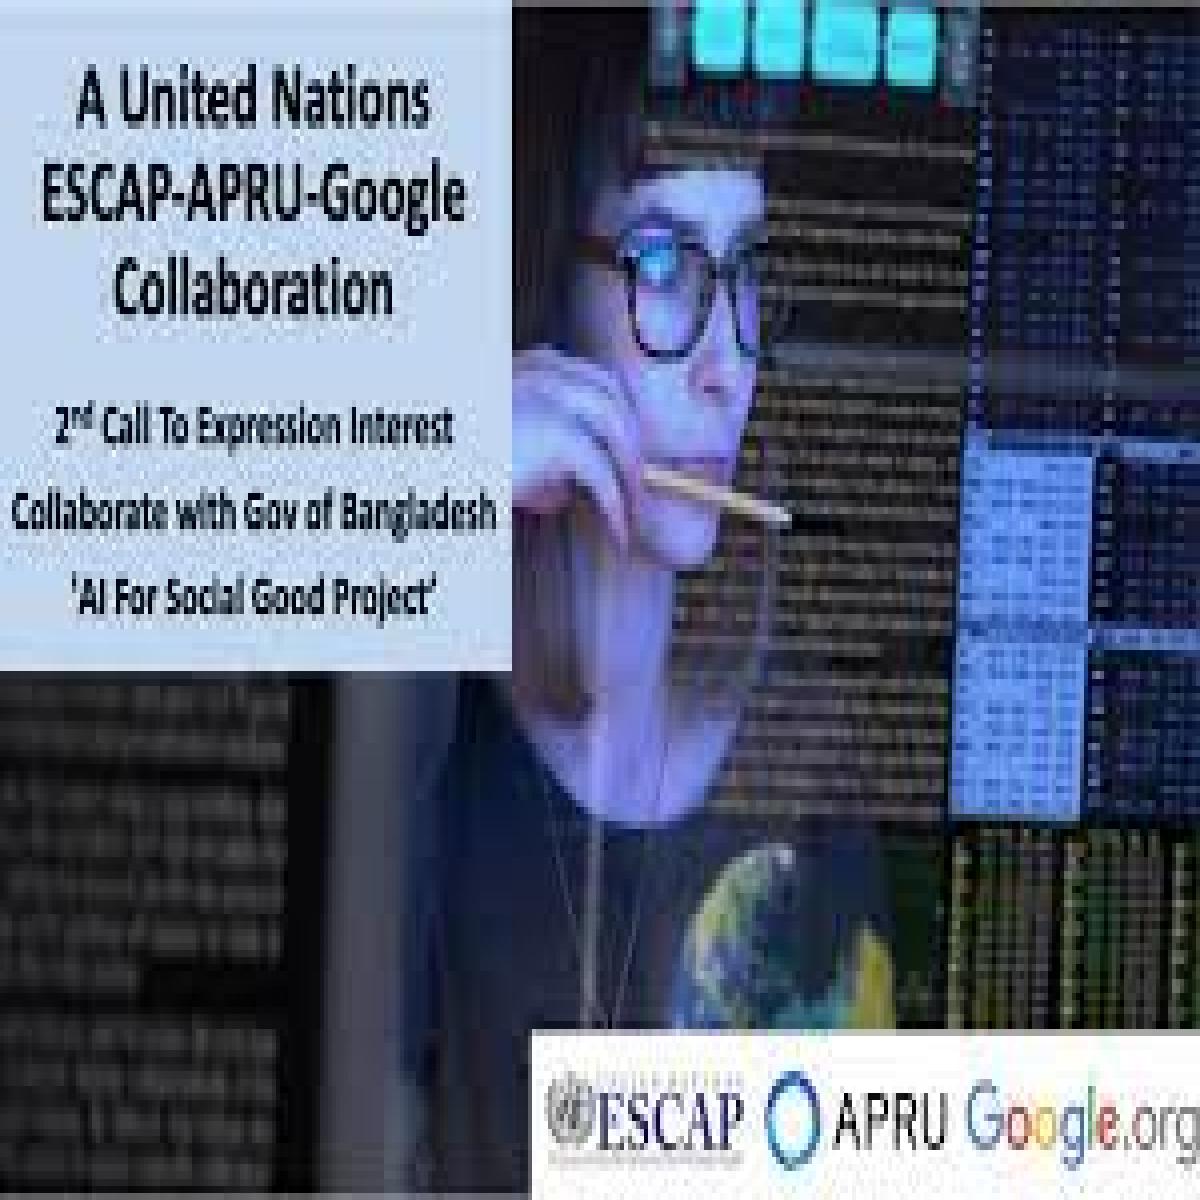 The next stage: APRU-Google-UN ESCAP AI for Social Good Project now working directly with government agencies